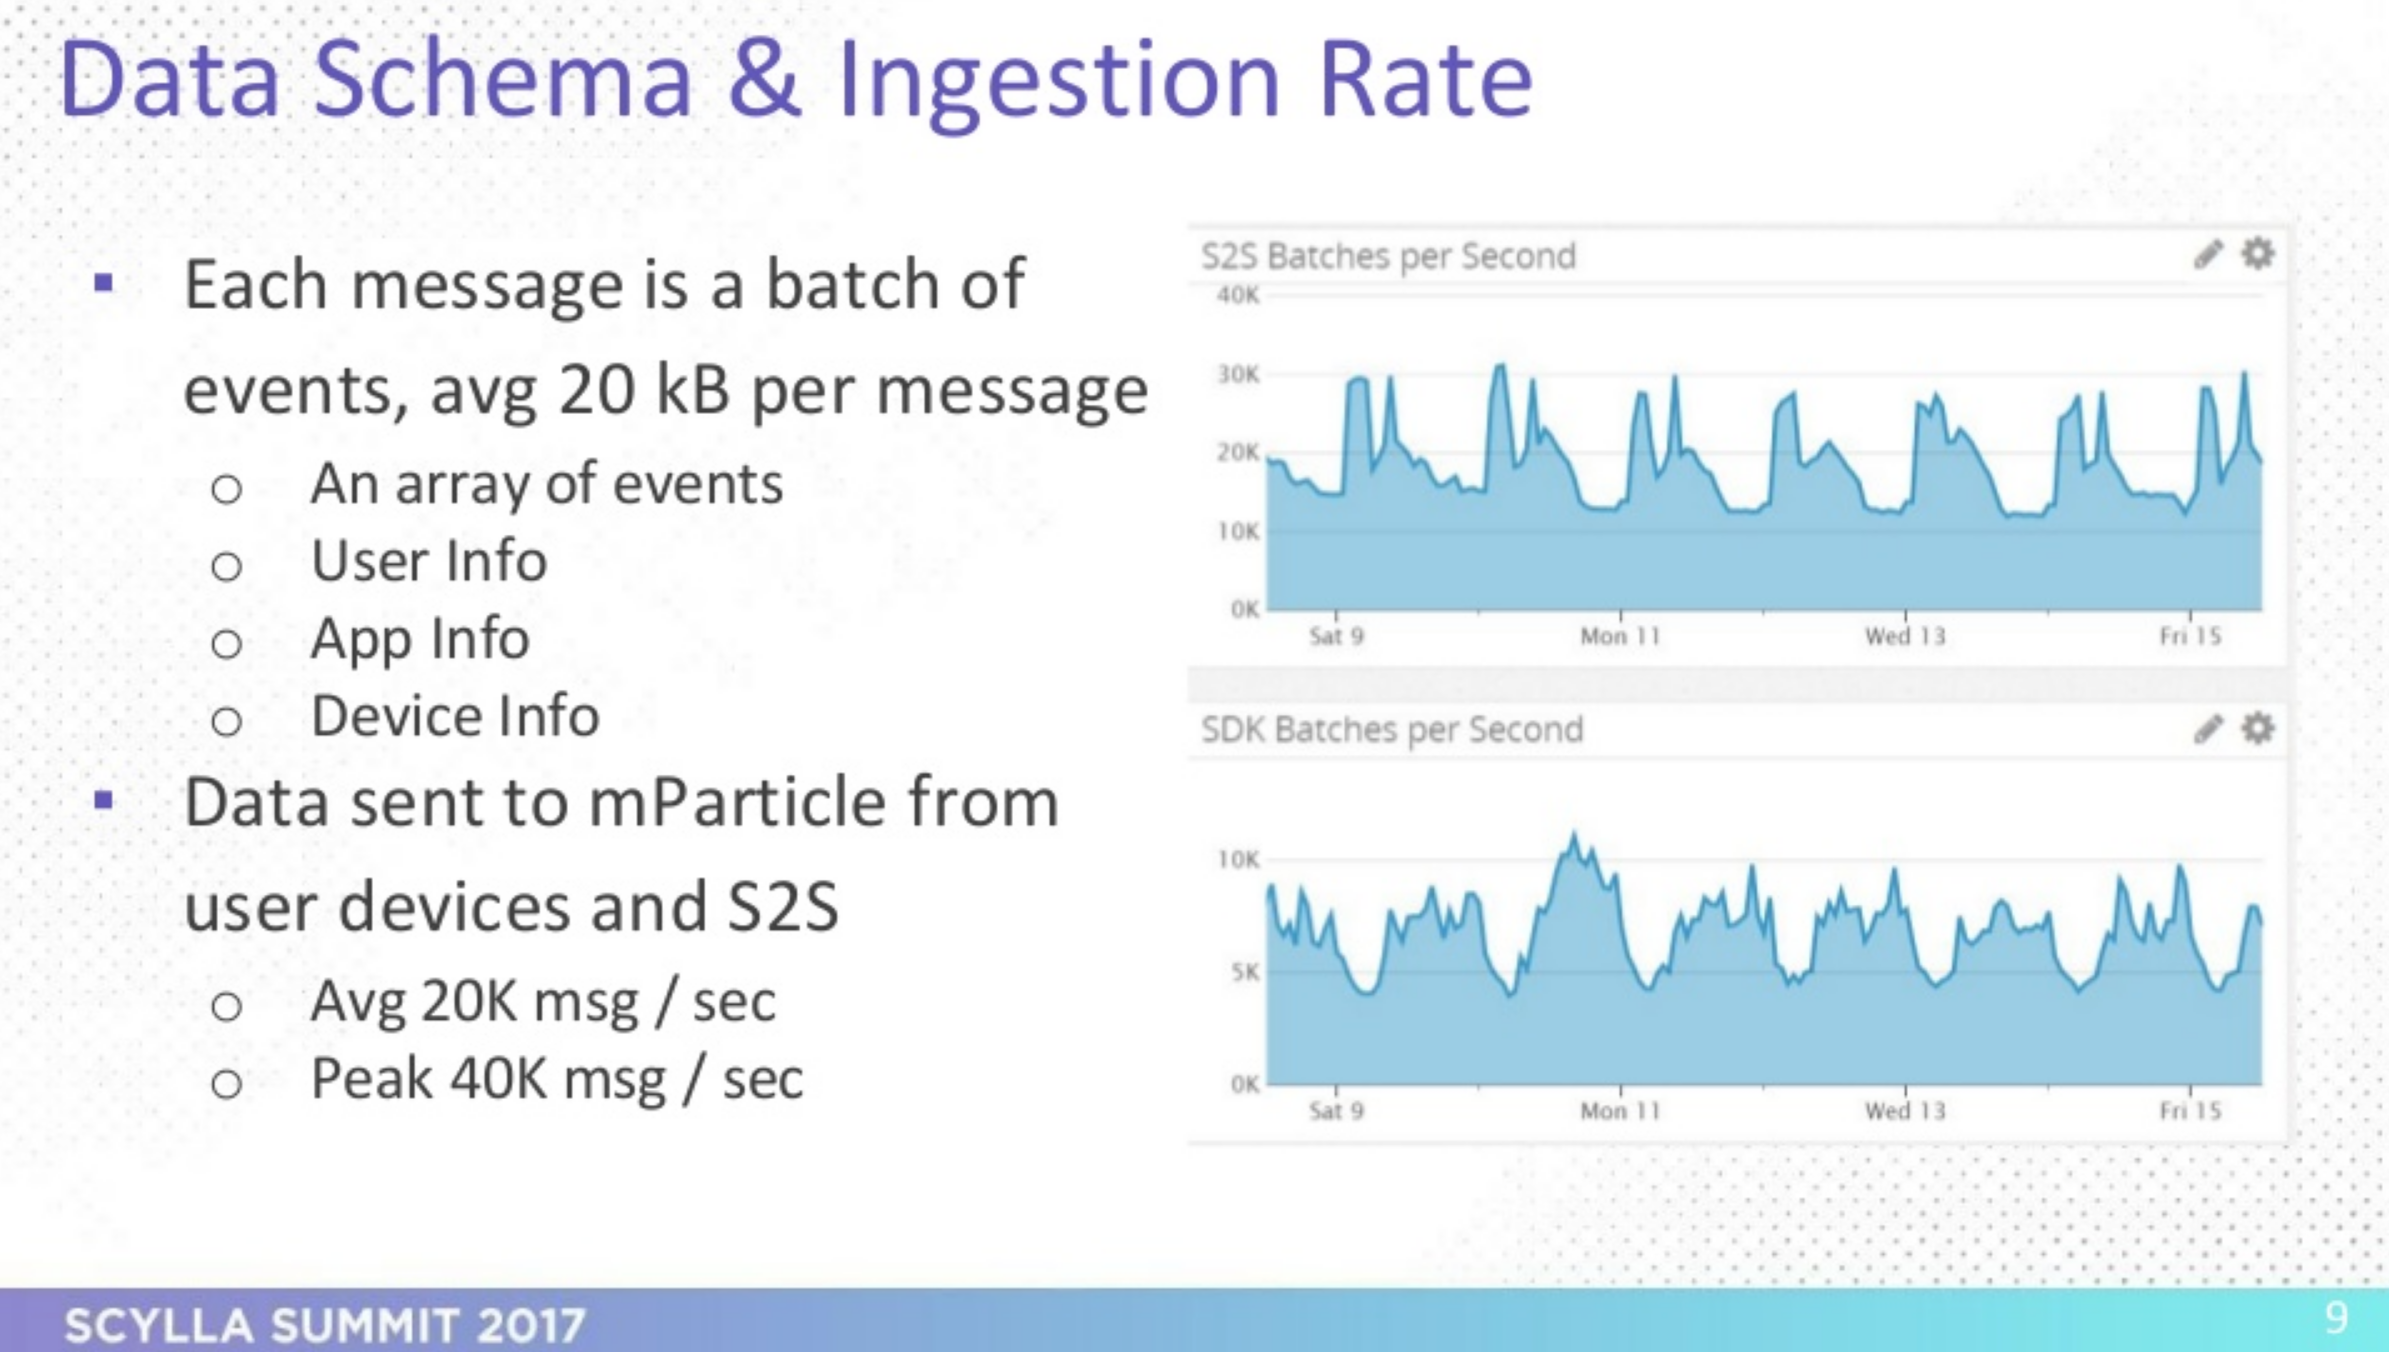 mParticle Data Schema and Ingestion Rate